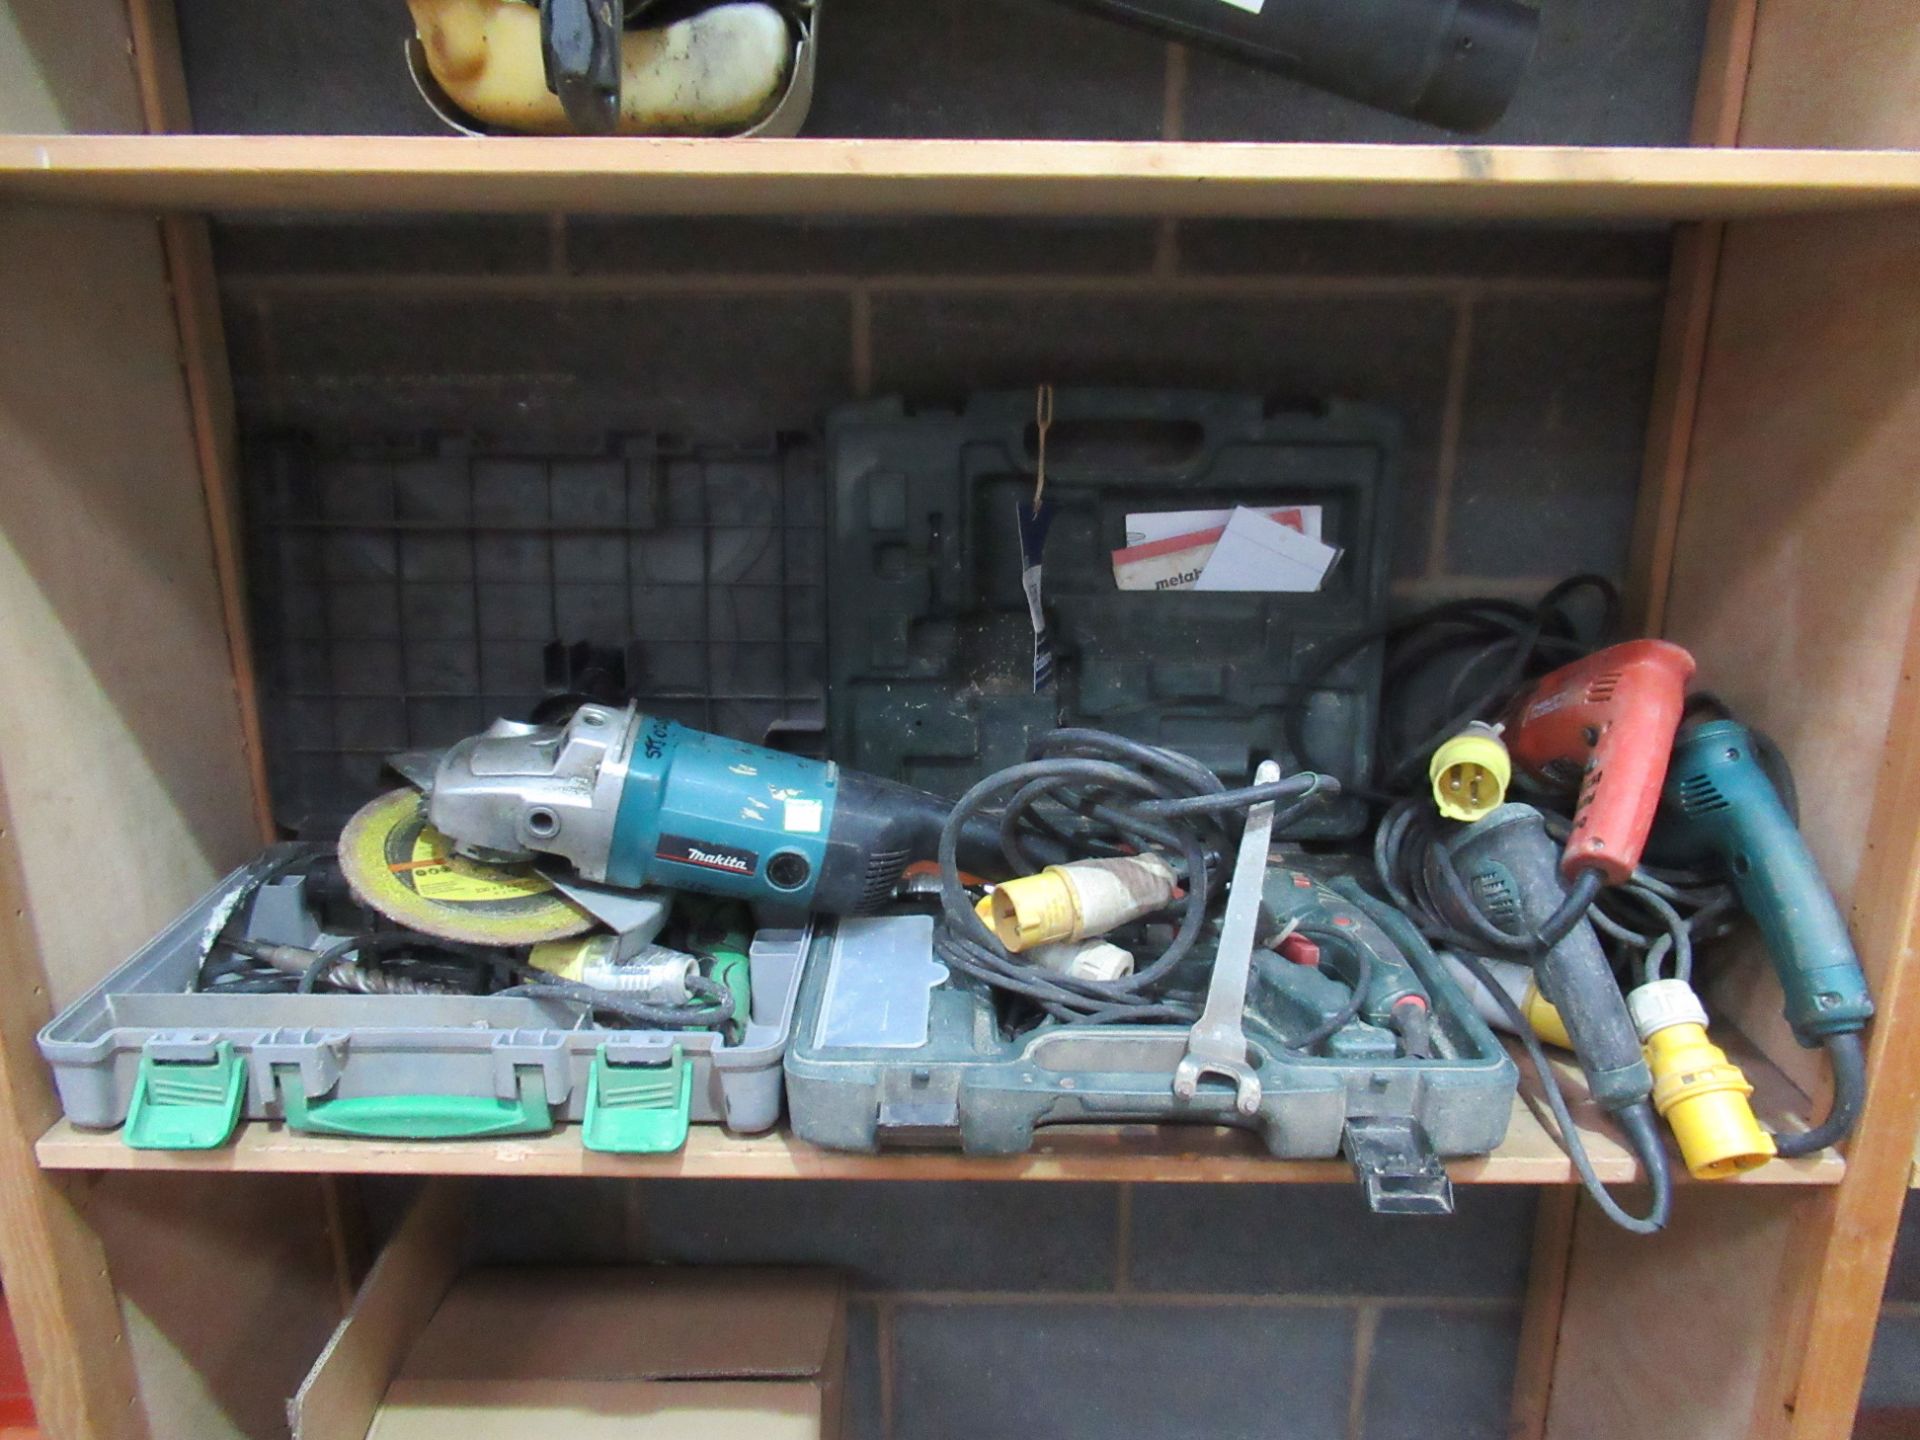 A Selection of 110V Hand Tools